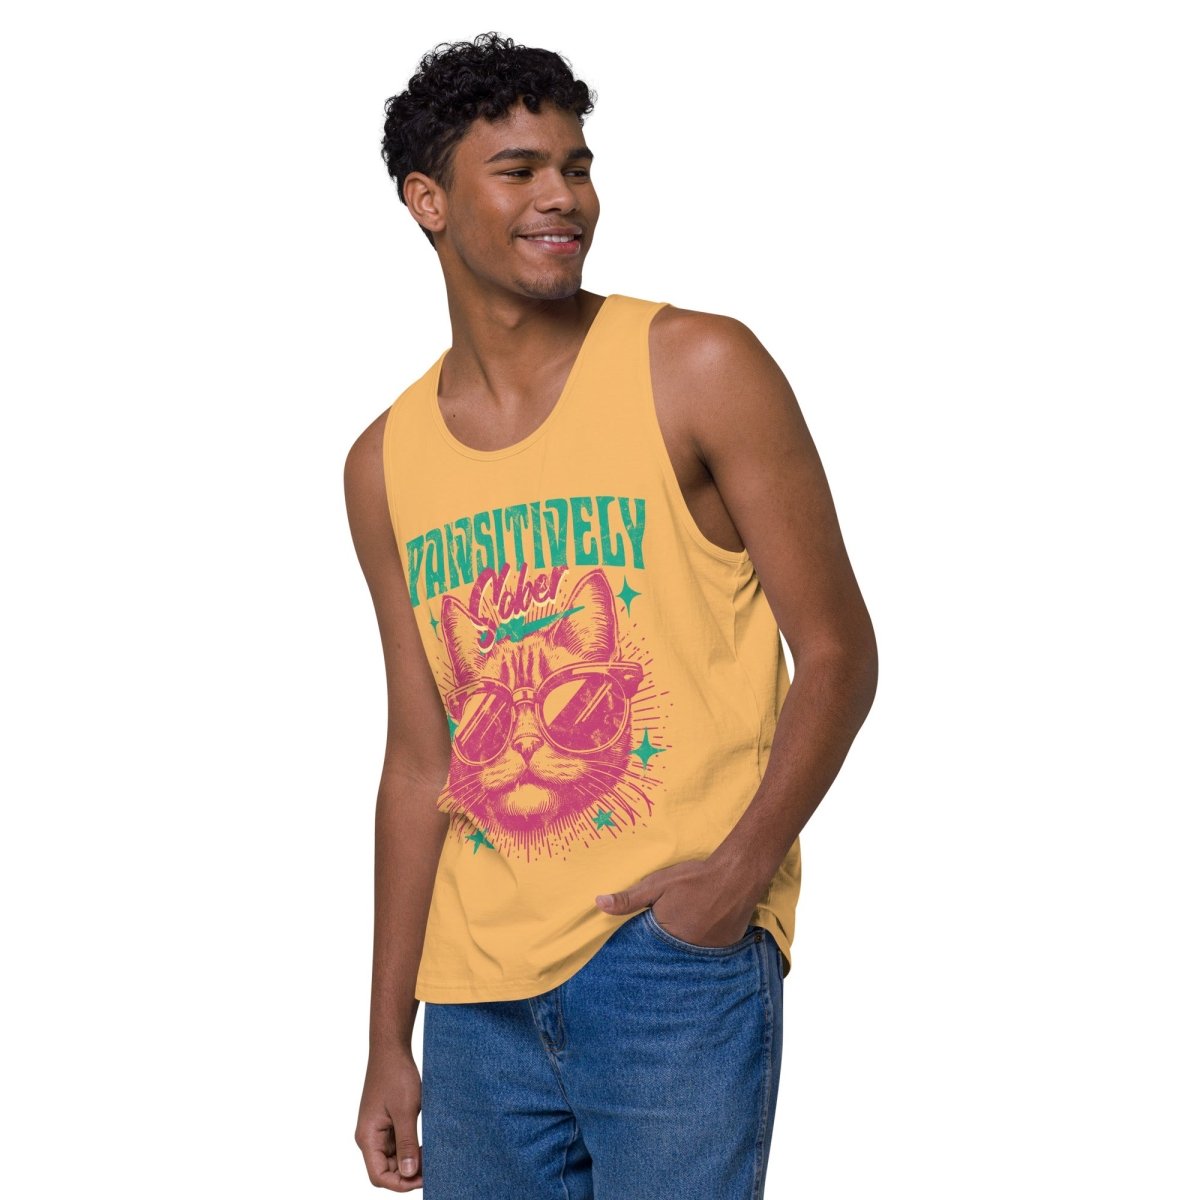 Premium Sobriety Tank Top for Men - Pawsitively Empowered - | Sobervation